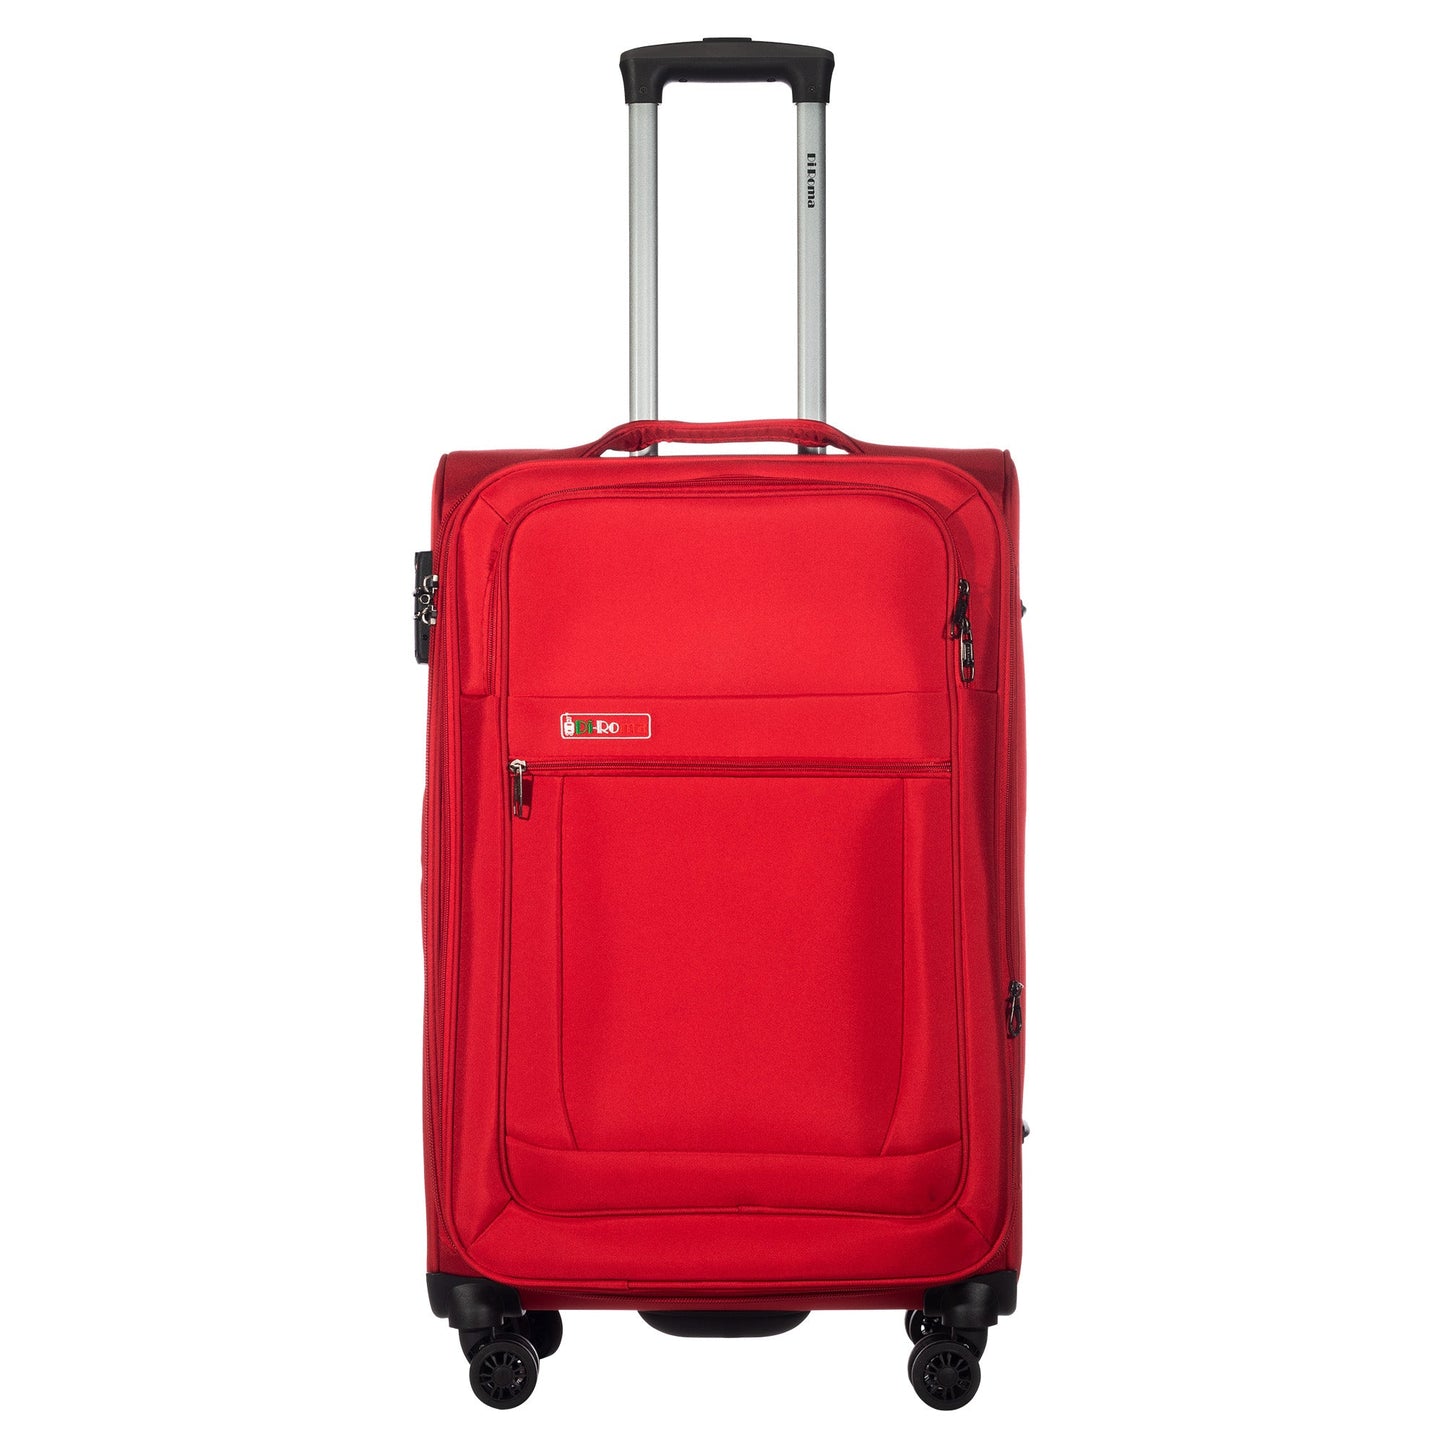 Luca Collection Red luggage (20/26/30") Suitcase